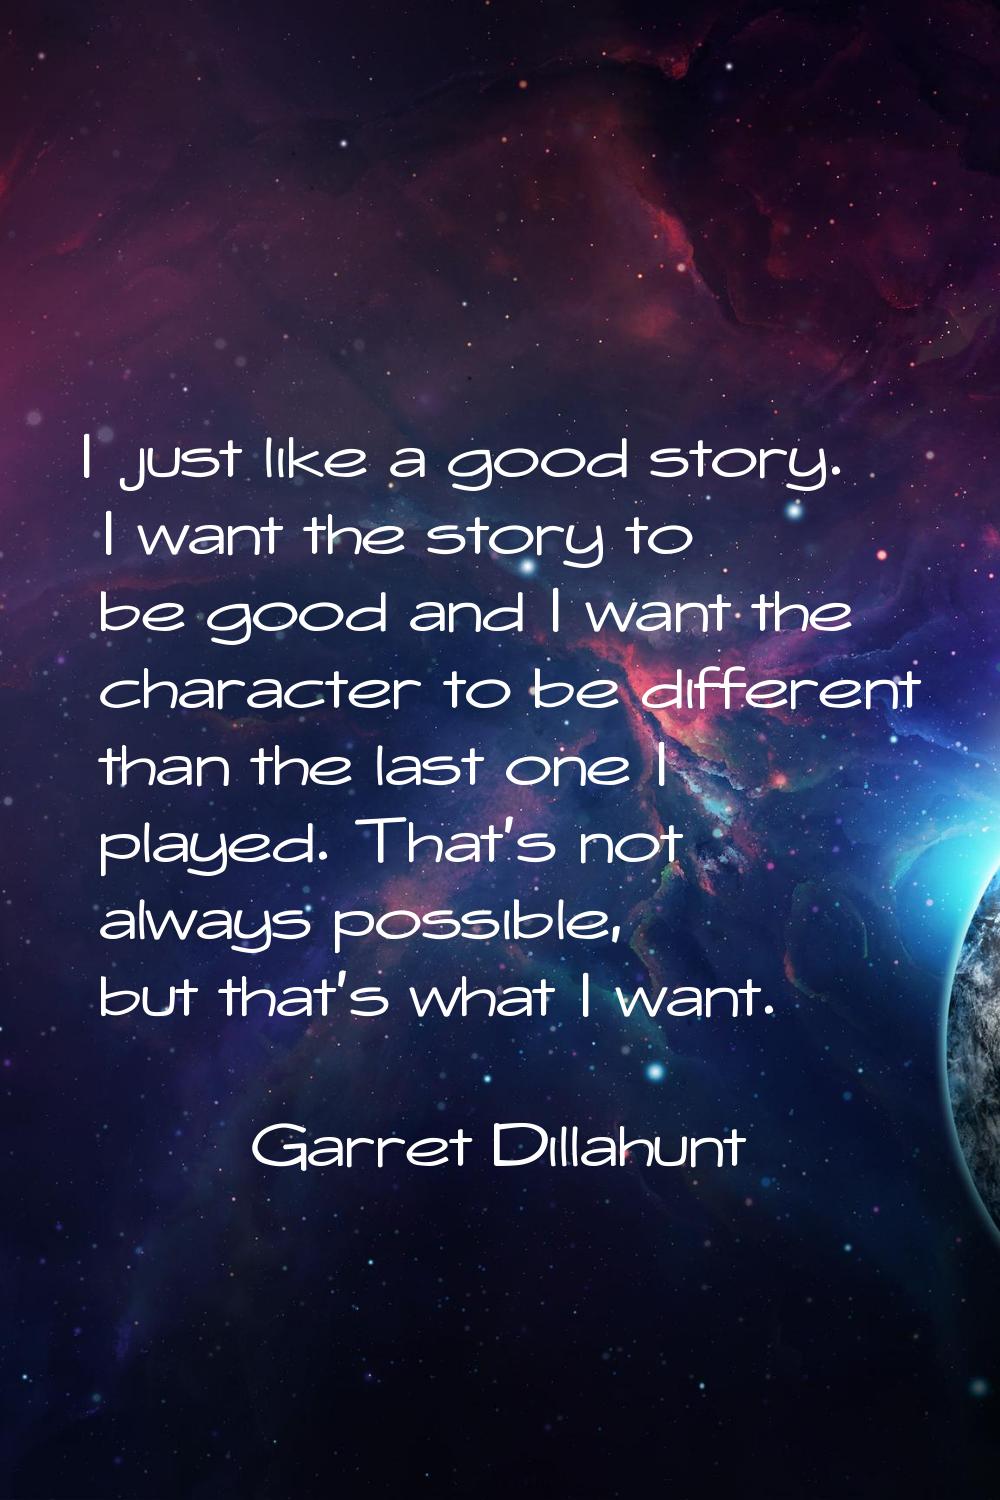 I just like a good story. I want the story to be good and I want the character to be different than